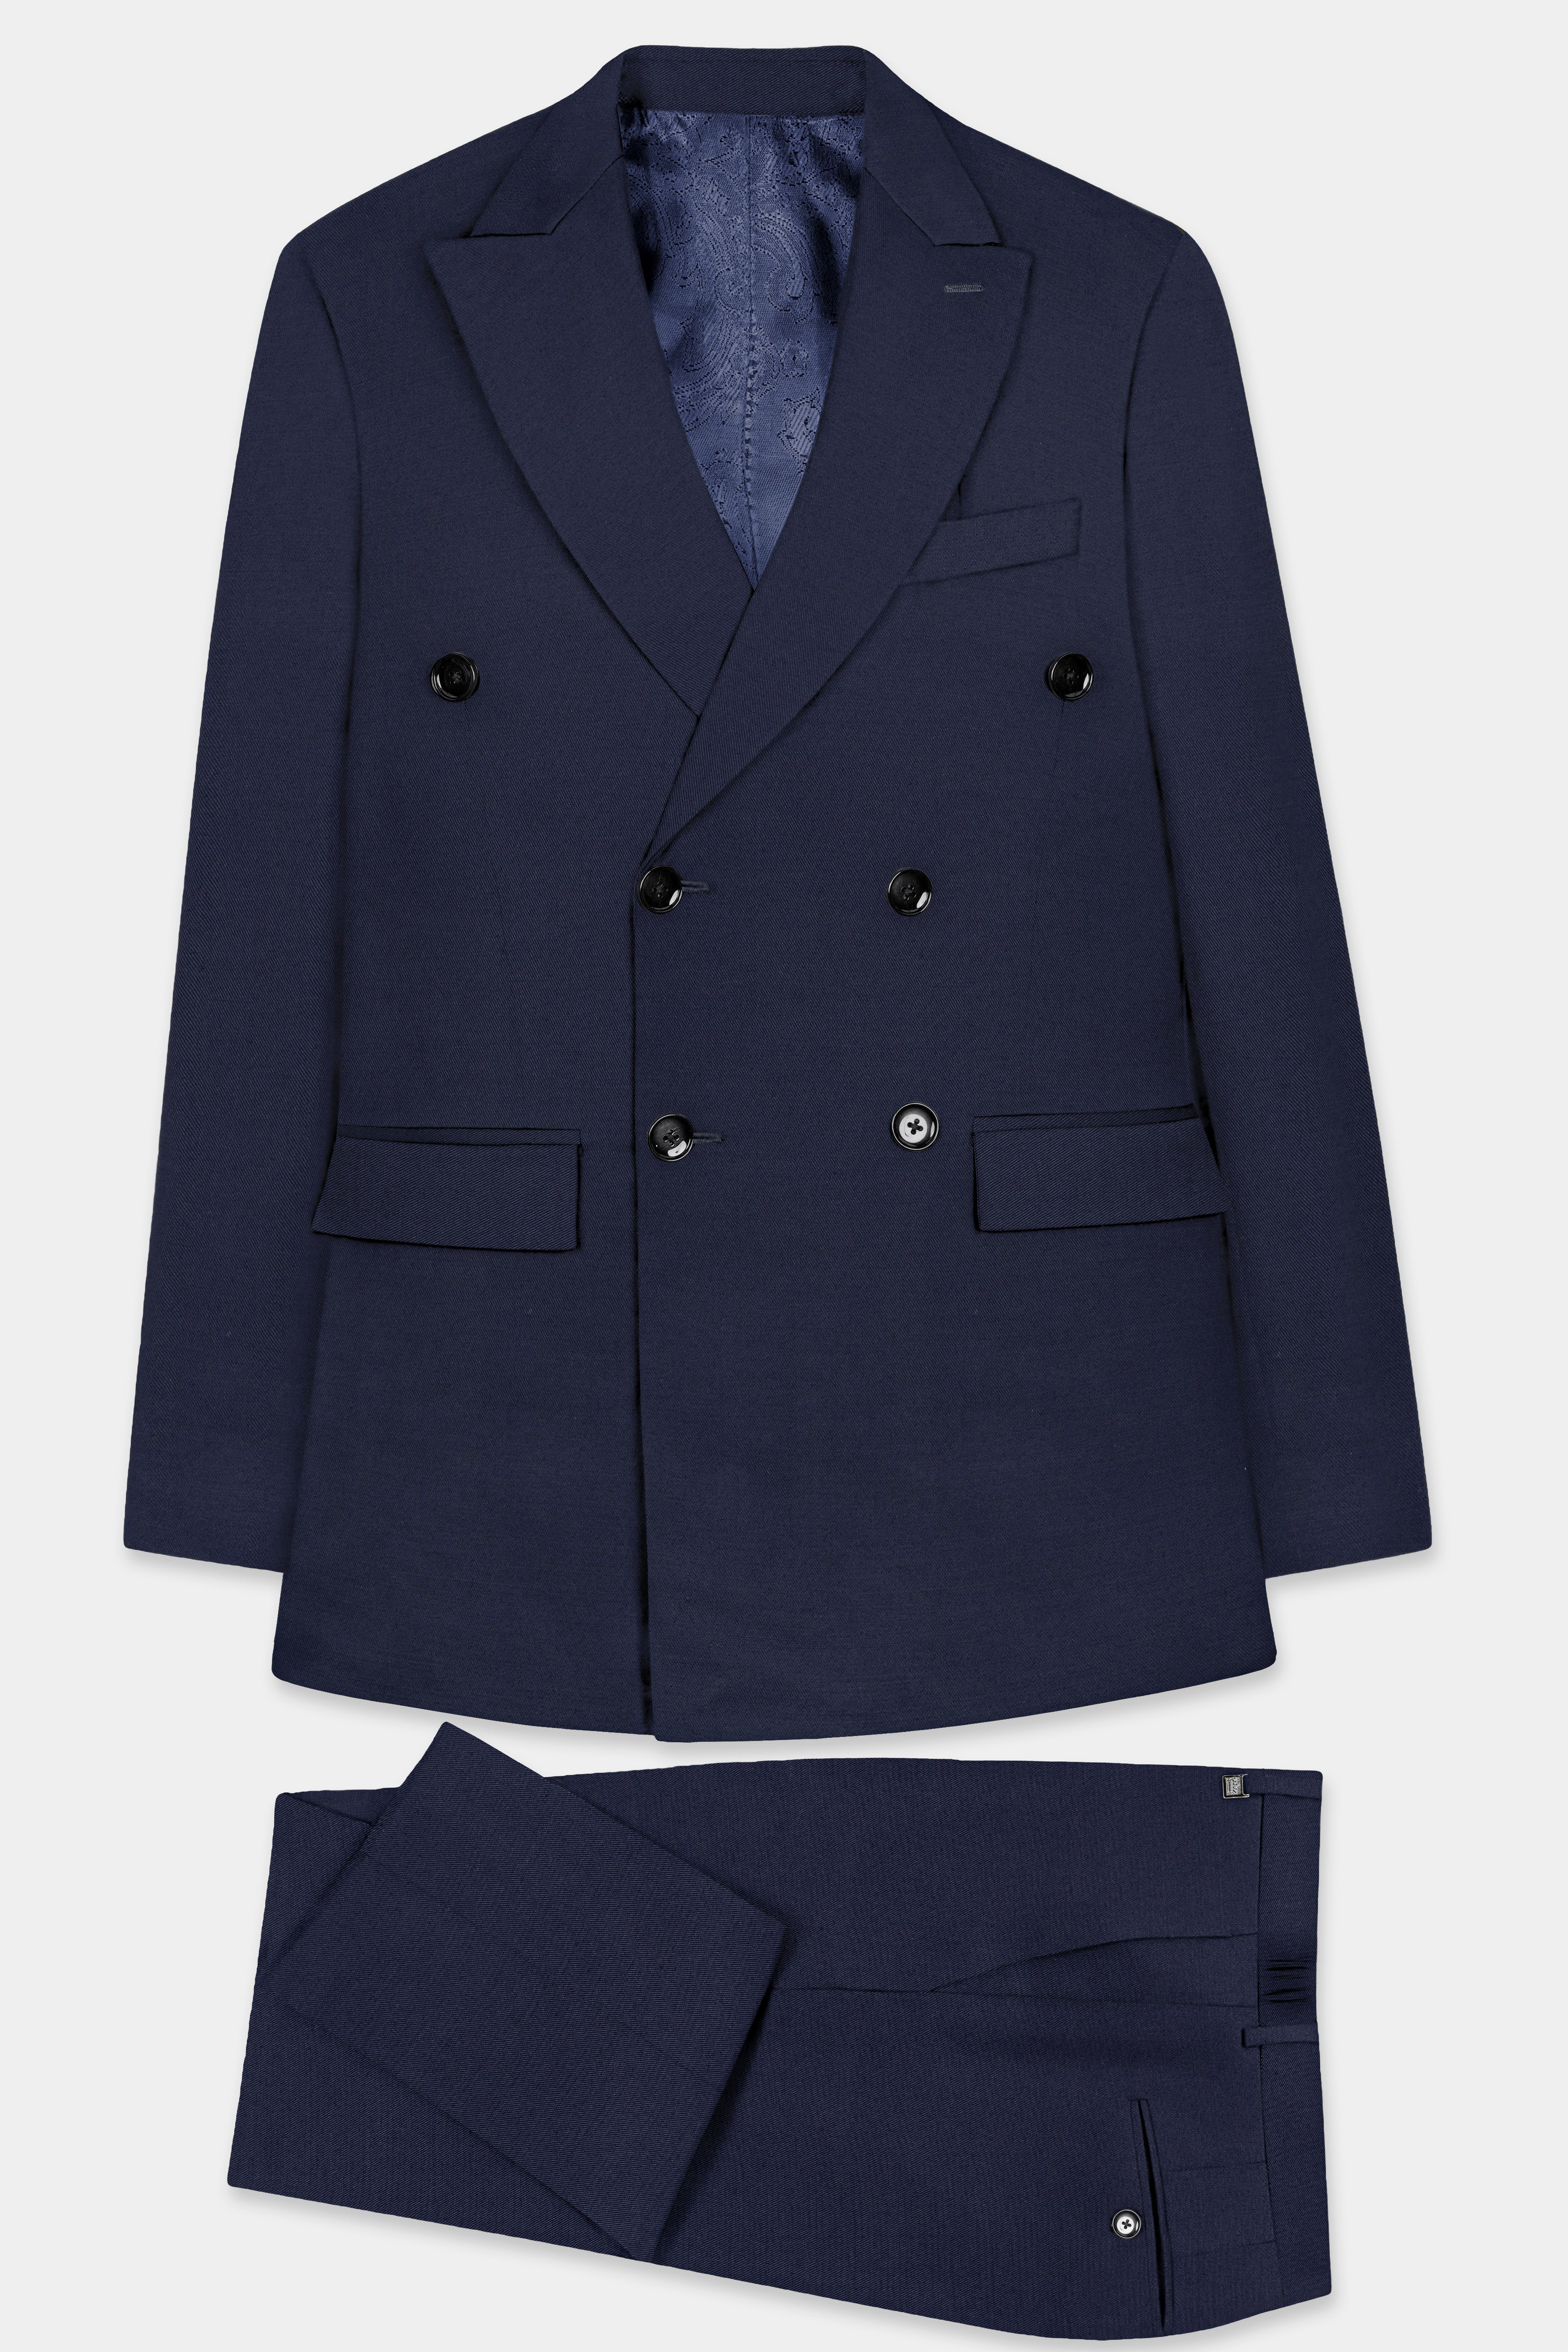 Vulcan Blue Plain Solid Wool Blend Double Breasted Suit